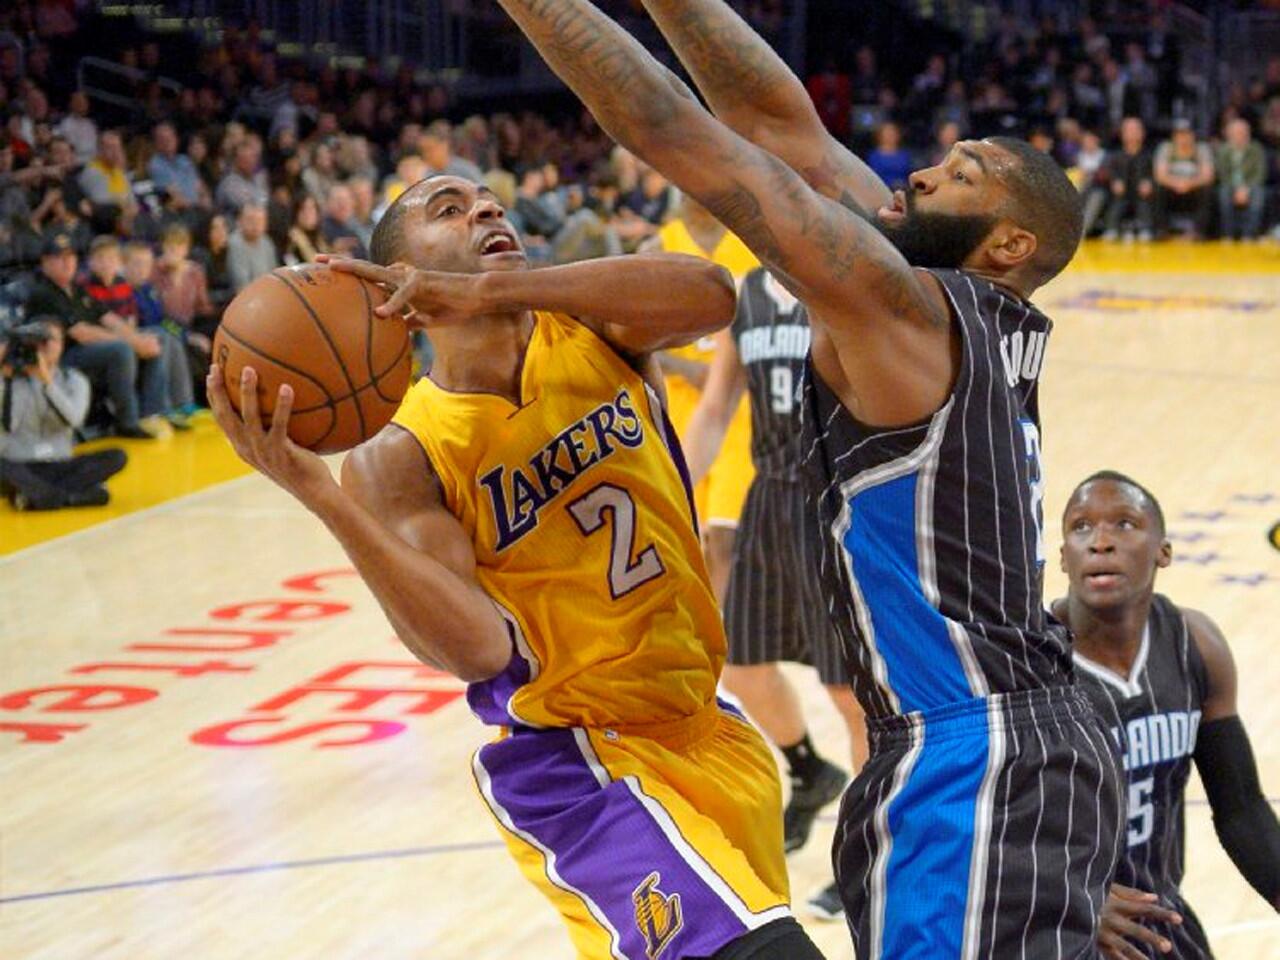 Lakers guard Wayne Ellington tries to put up a shot with Magic power forward Kyle O'Quinn standing in his way during the first half.